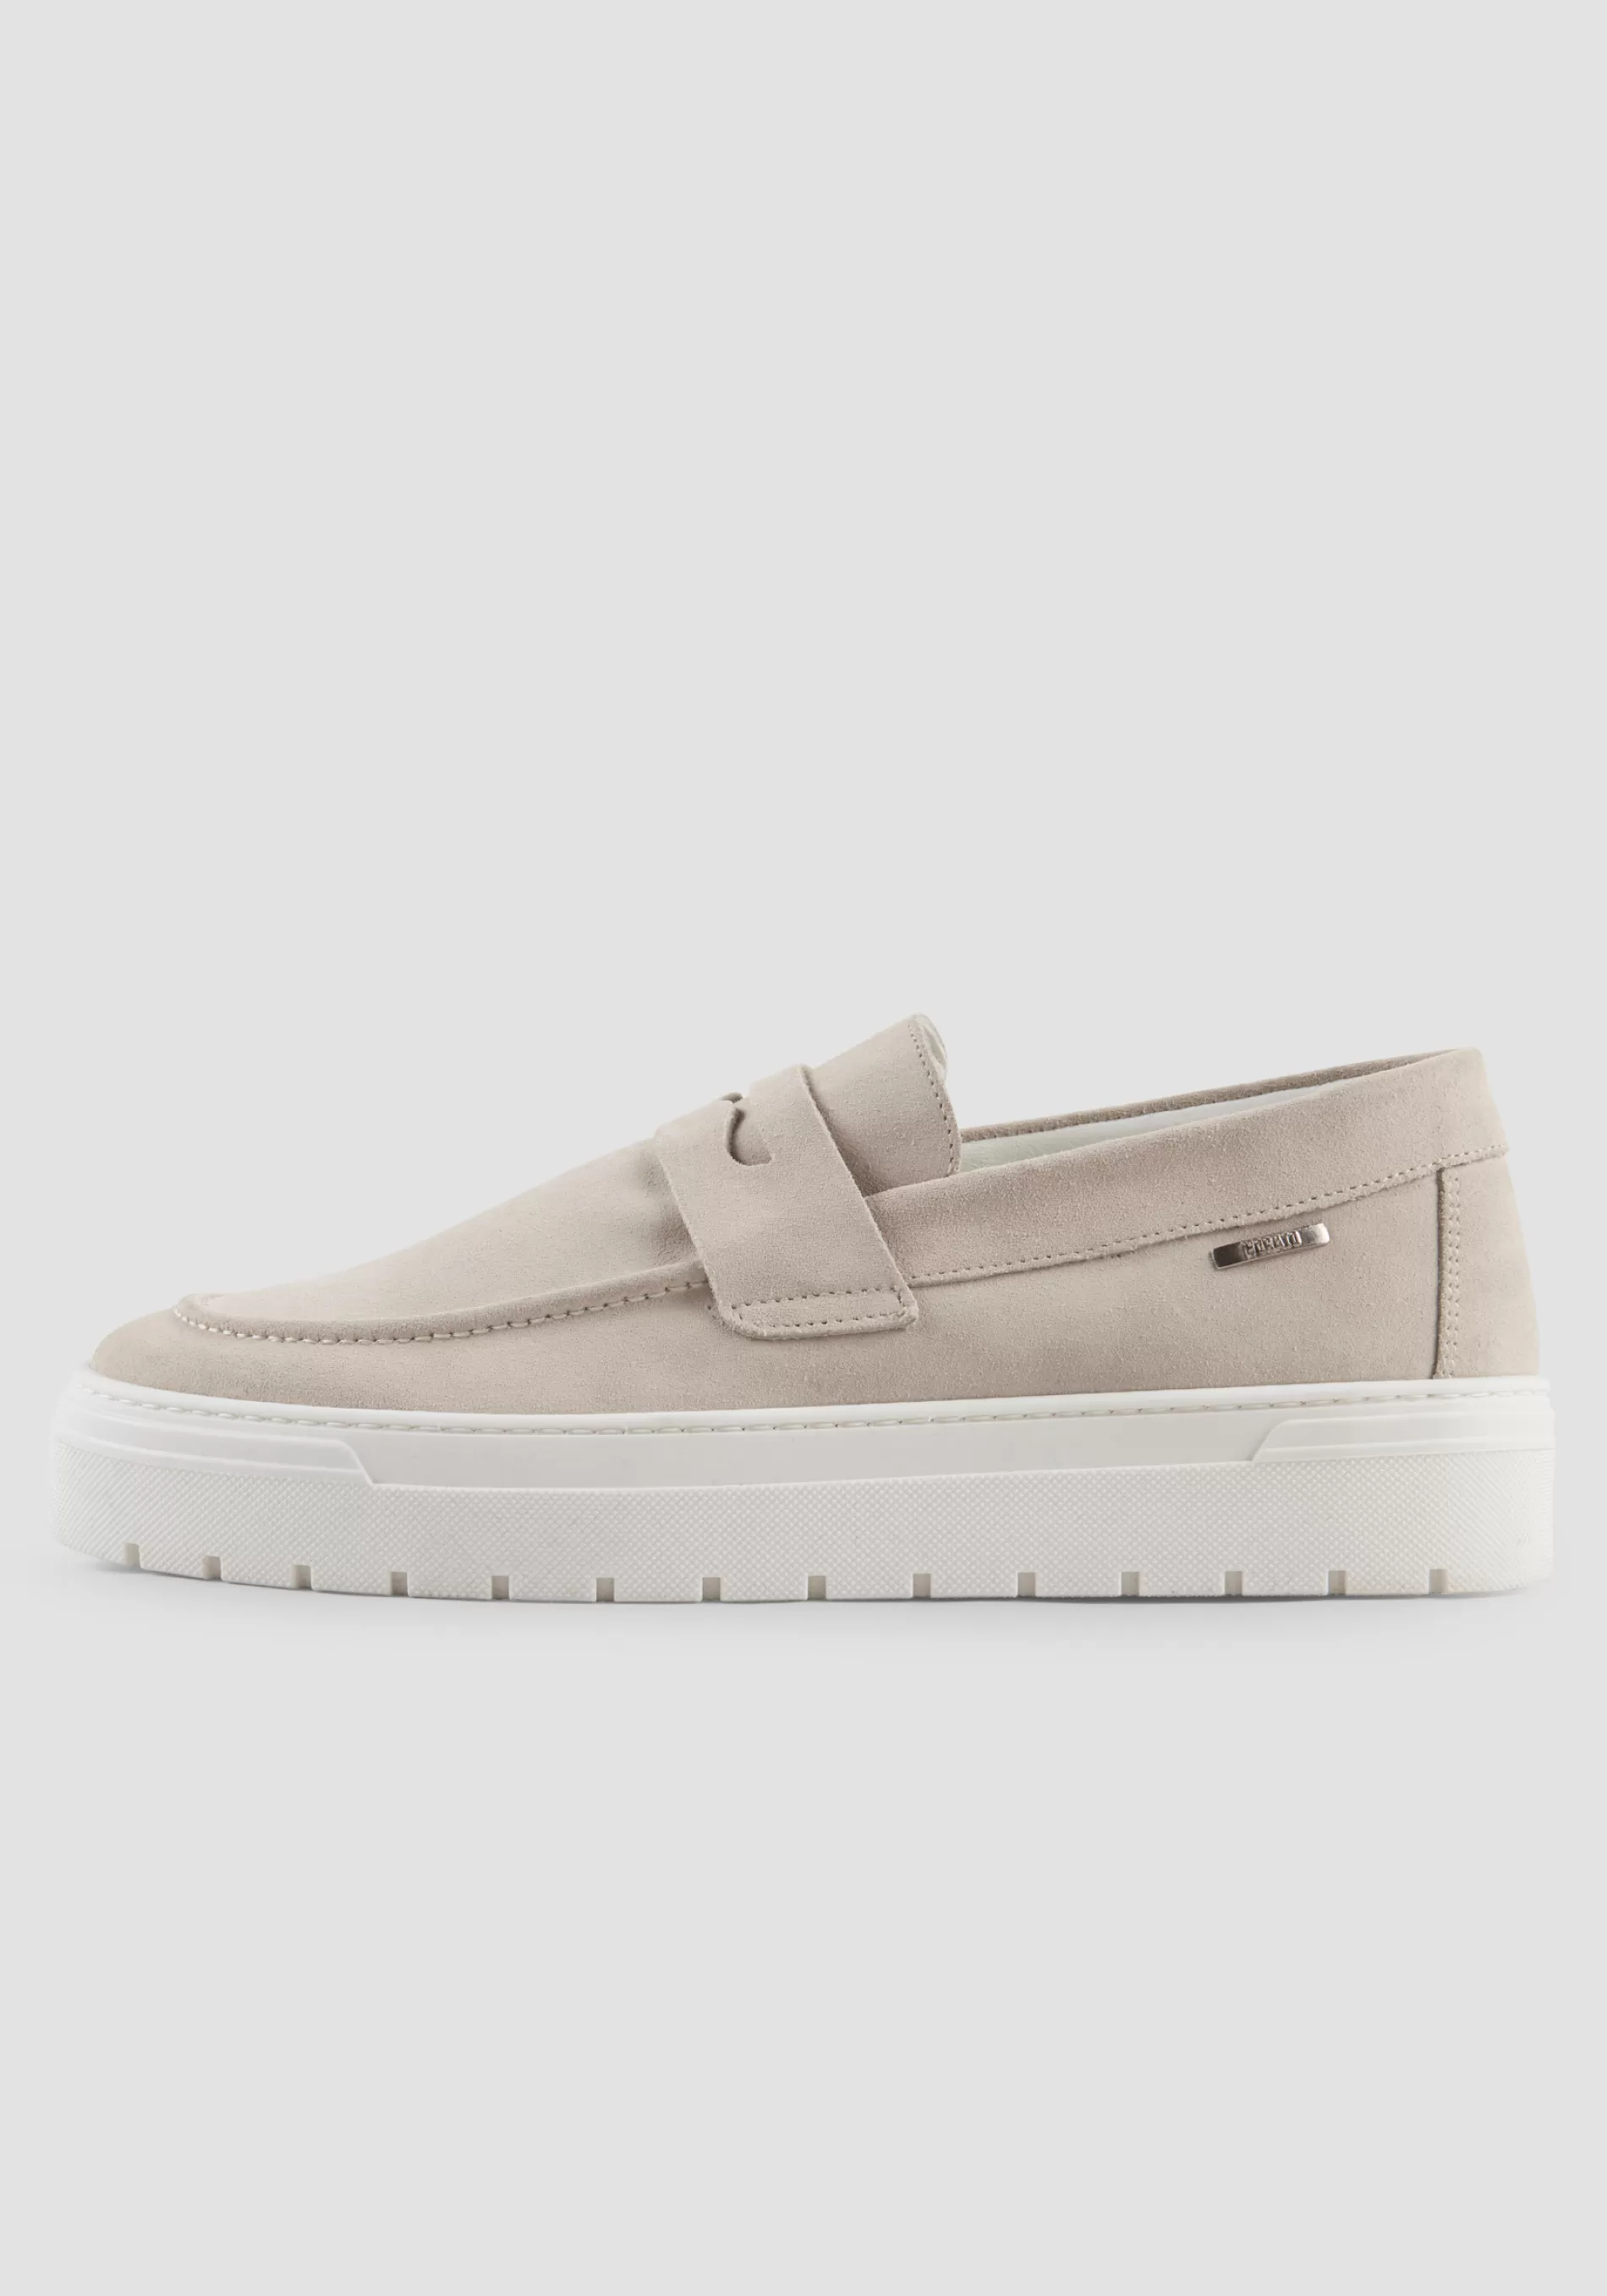 New RUDDER SUEDE MOCCASIN Sneakers | Formal shoes